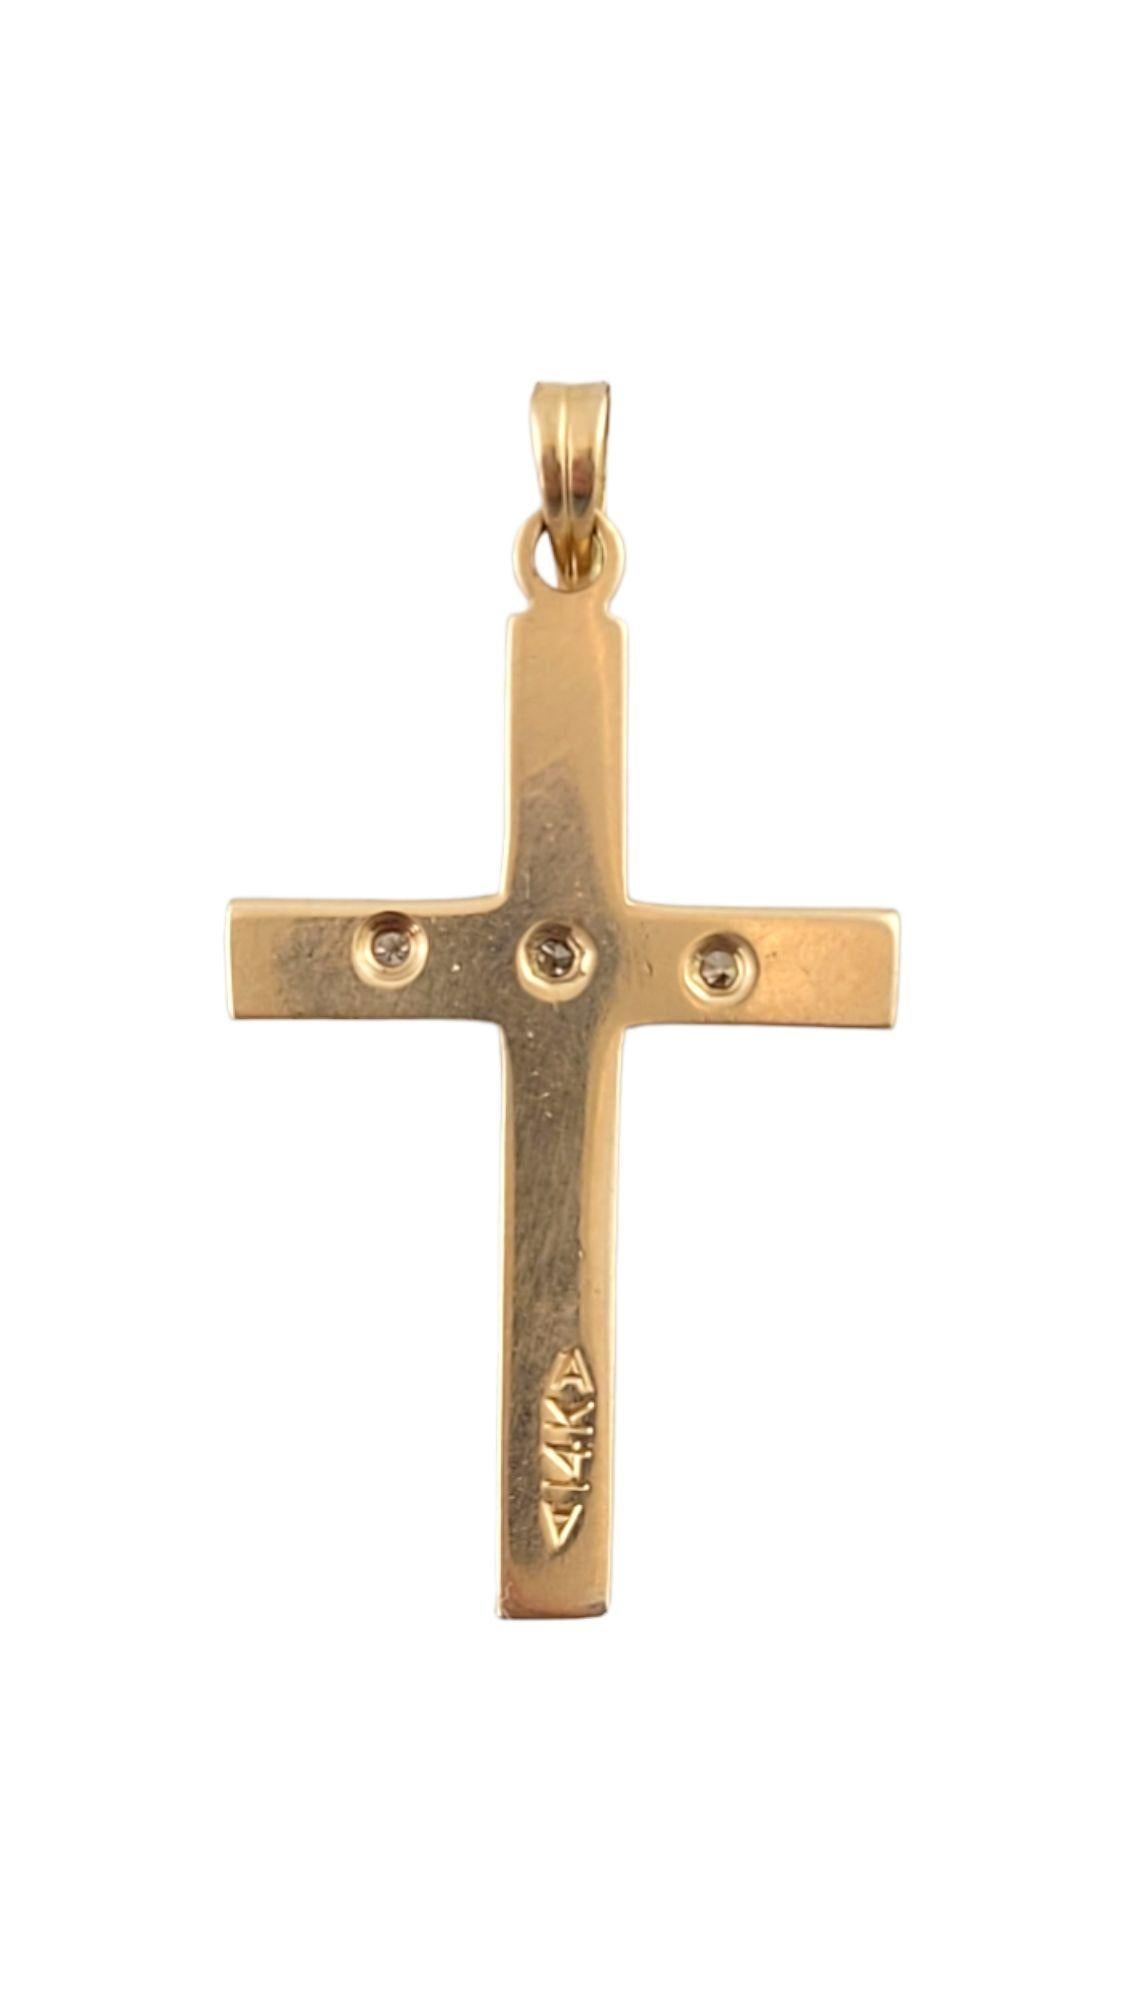 Gorgeous two tone yellow and white gold cross pendant decorated with 3 beautiful single cut diamonds!

Approximate total diamond weight: 0.02 cts

Diamond clarity: VS2

Diamond color: G

Size: 28mm X 17mm X 2mm

Length w/ bail: 32mm

Weight: 1.56 g/